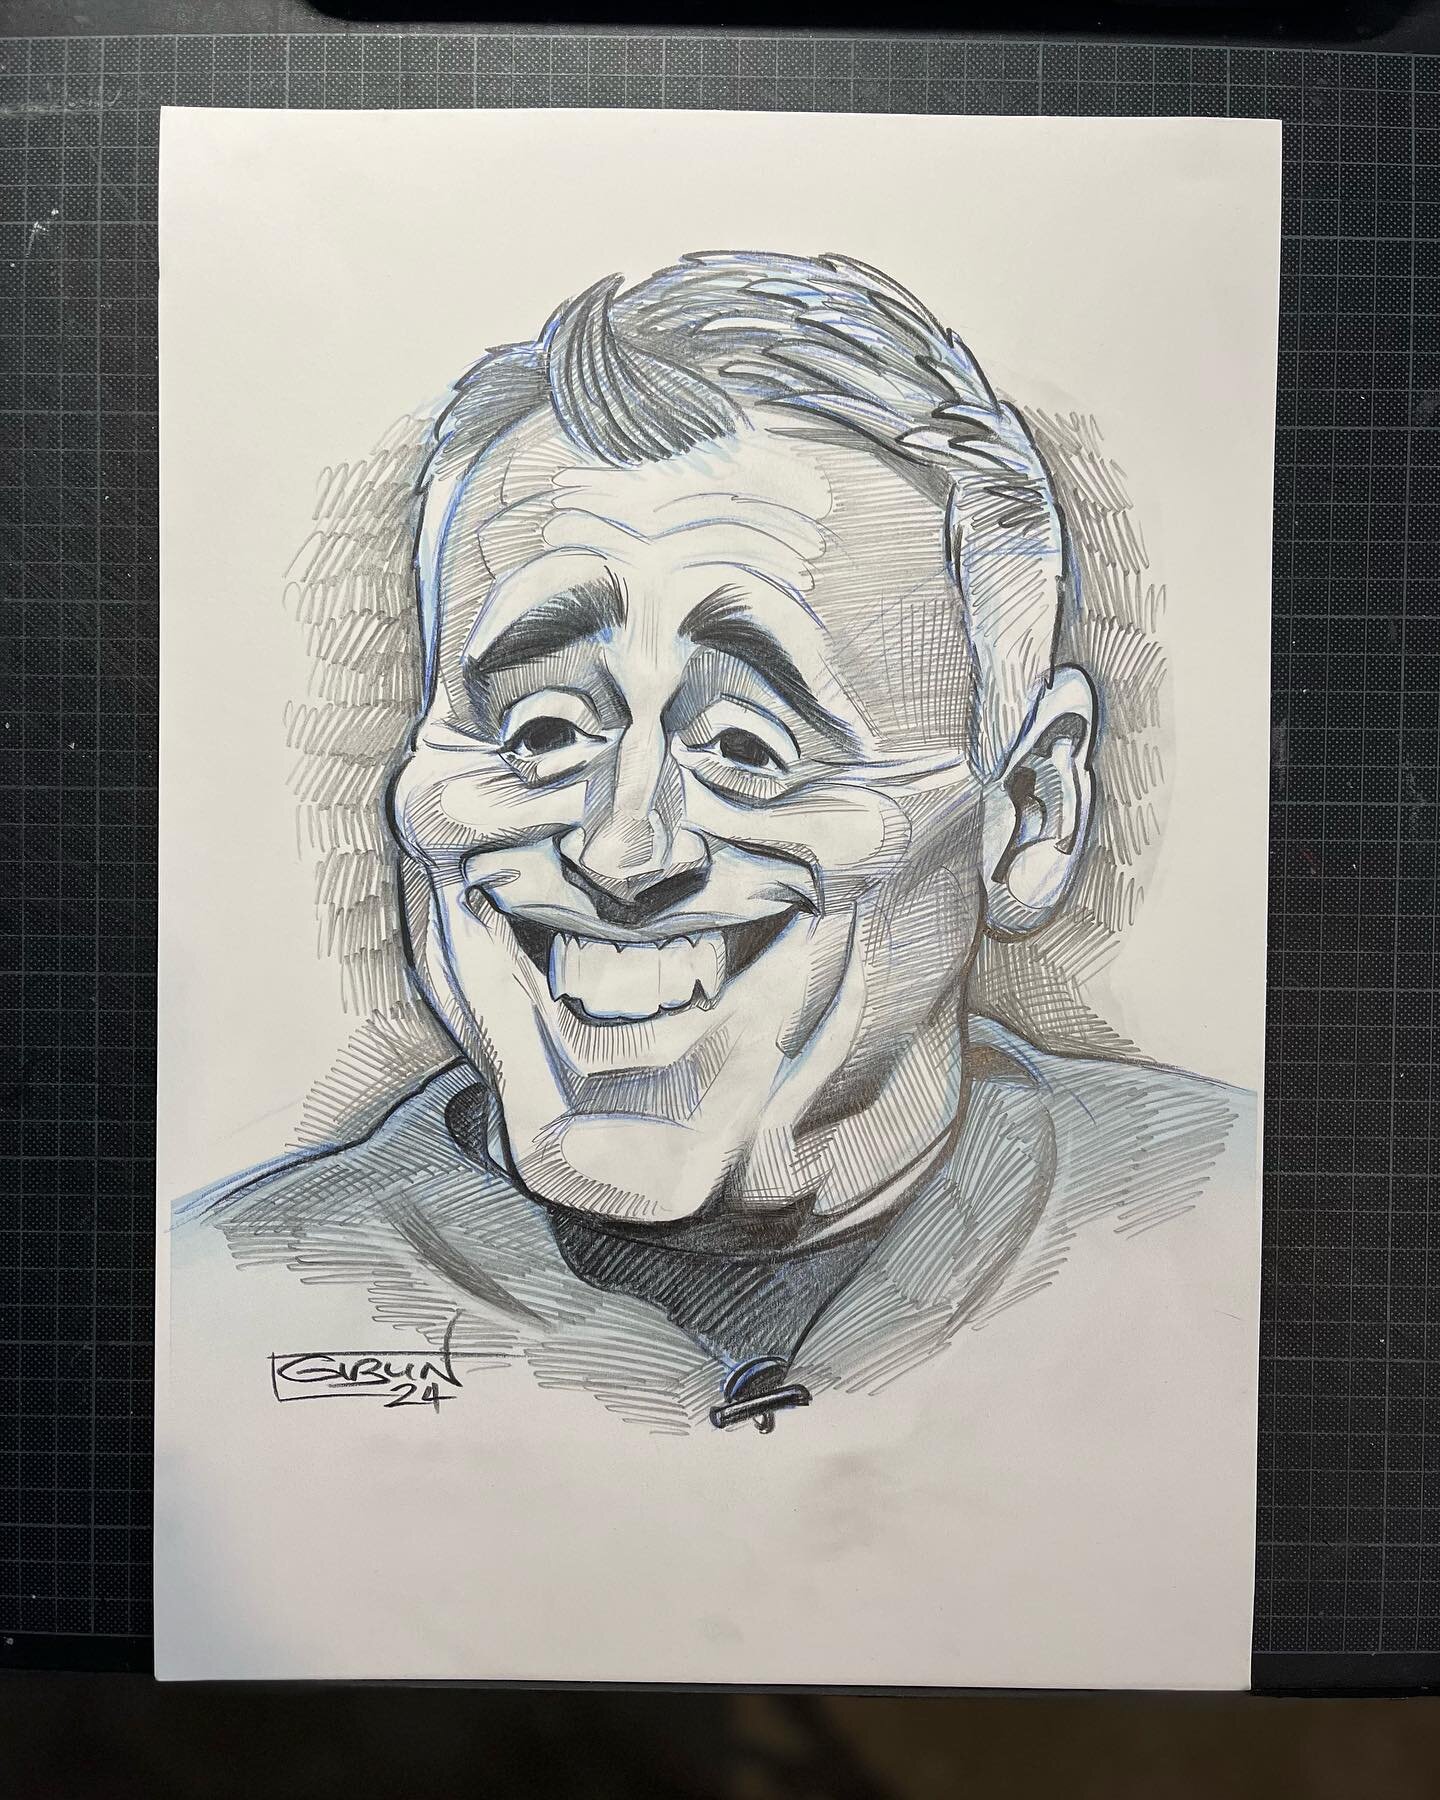 It&rsquo;s been a while since I did some honest to goodness sketching. Here&rsquo;s a little caricature of Matt LeBlanc I drew at the drawing board this morning.

Want to own the original artwork? DM me! 🤙

#mattleblanc #caricature #celebritycaricat